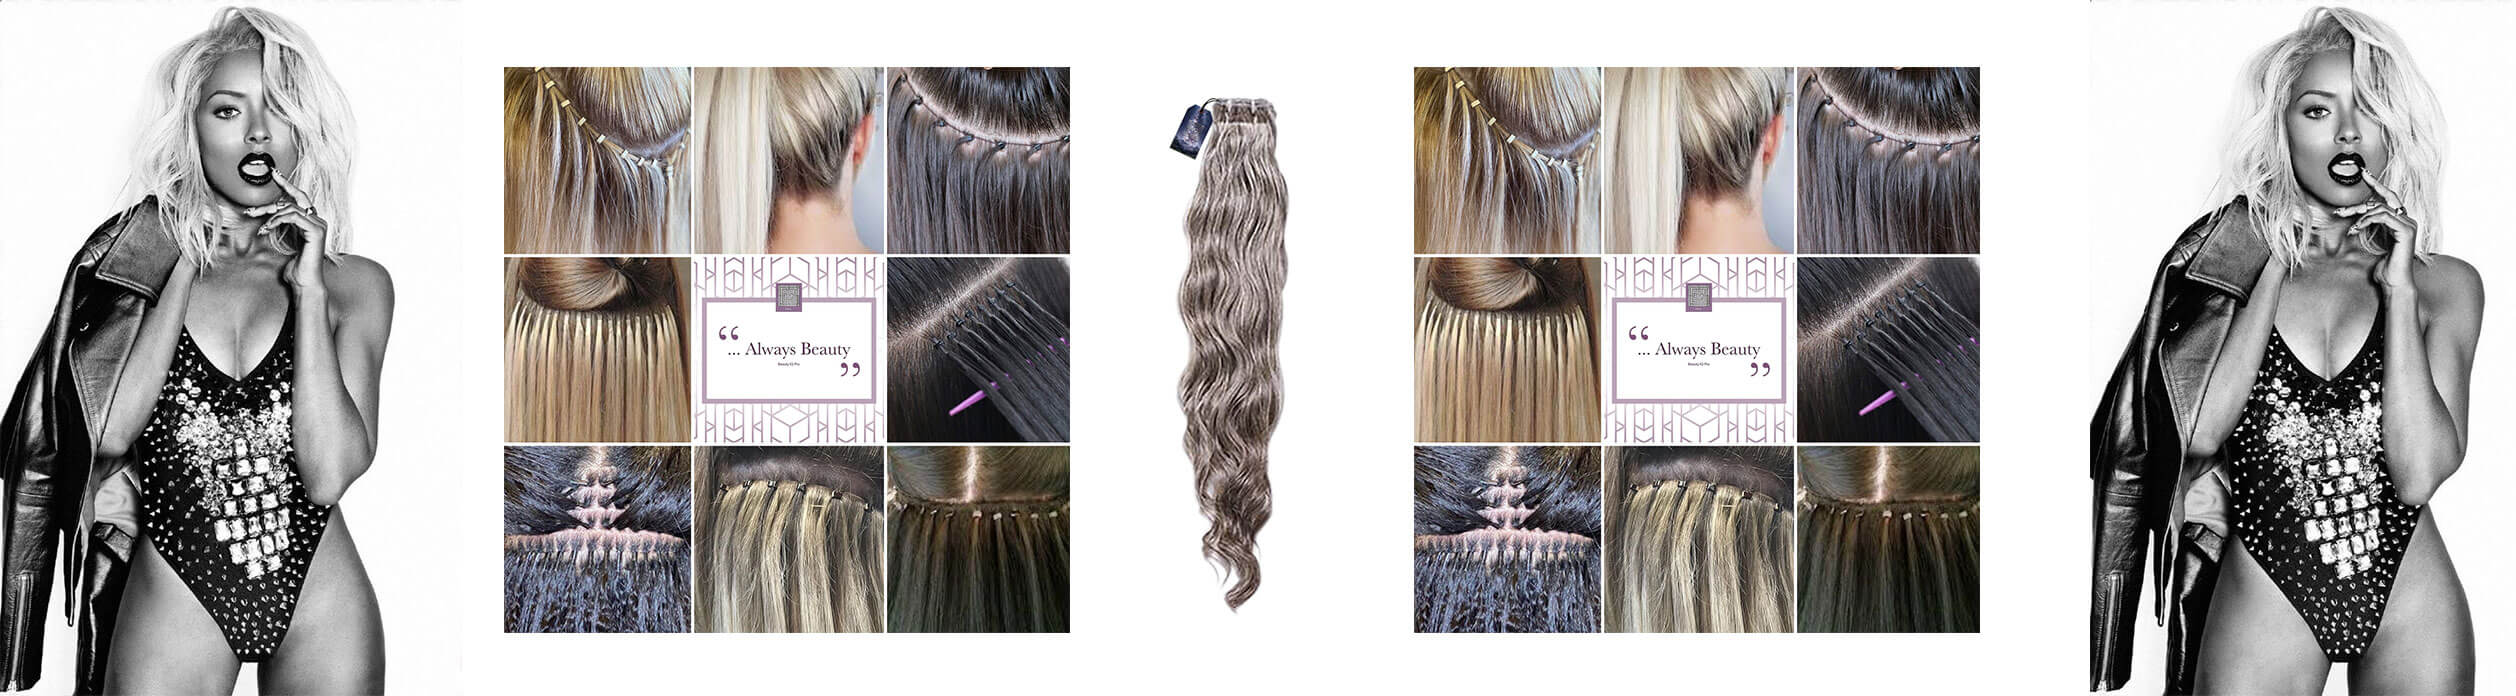 MASTER HAIR EXTENSIONS TRAINING